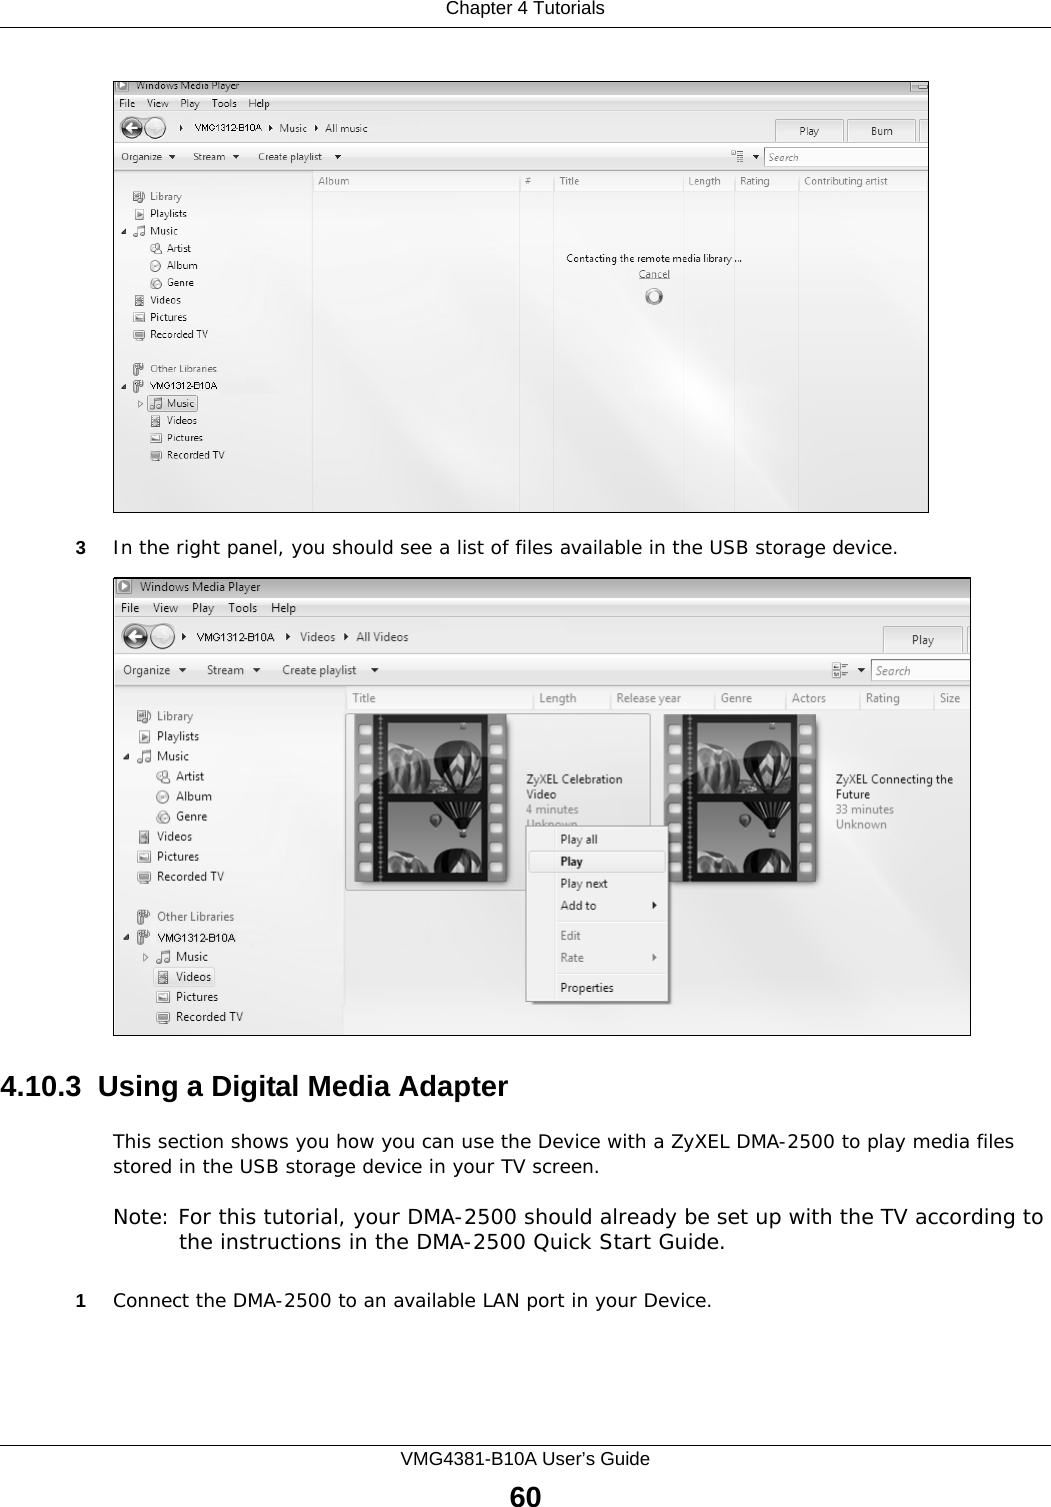 Chapter 4 TutorialsVMG4381-B10A User’s Guide60Tutorial: Media Sharing using Windows 7 (2)3In the right panel, you should see a list of files available in the USB storage device. Tutorial: Media Sharing using Windows 7 (2)4.10.3  Using a Digital Media AdapterThis section shows you how you can use the Device with a ZyXEL DMA-2500 to play media files stored in the USB storage device in your TV screen. Note: For this tutorial, your DMA-2500 should already be set up with the TV according to the instructions in the DMA-2500 Quick Start Guide.1Connect the DMA-2500 to an available LAN port in your Device.